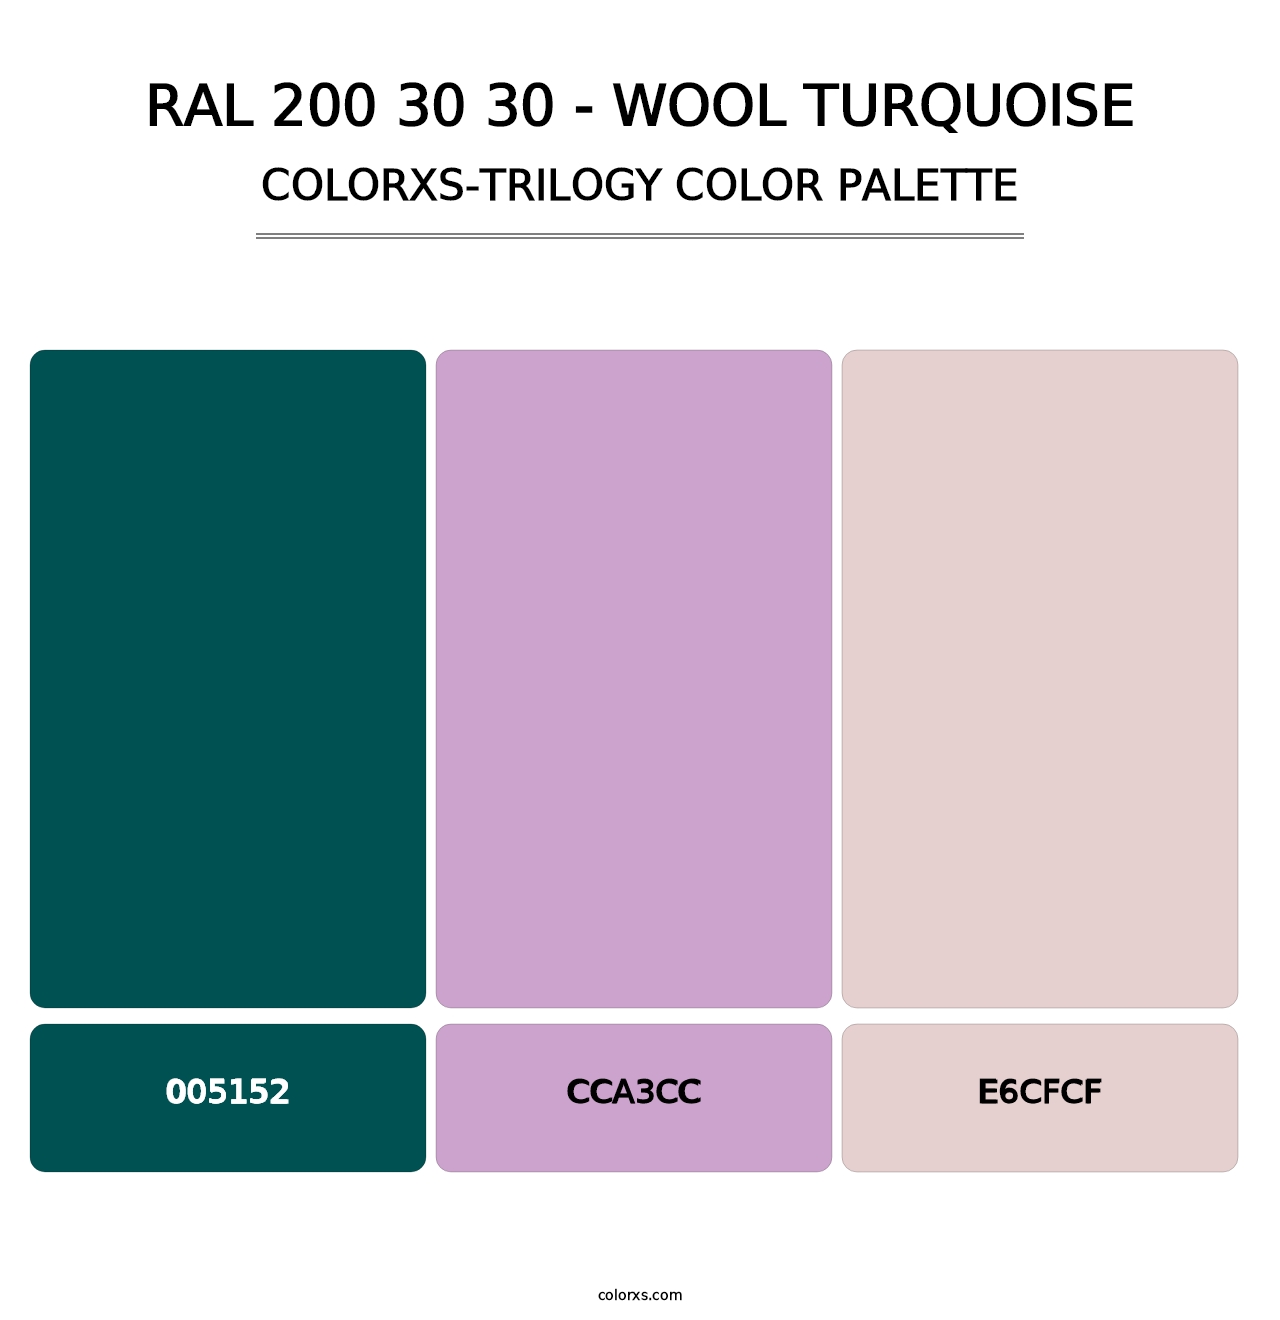 RAL 200 30 30 - Wool Turquoise - Colorxs Trilogy Palette